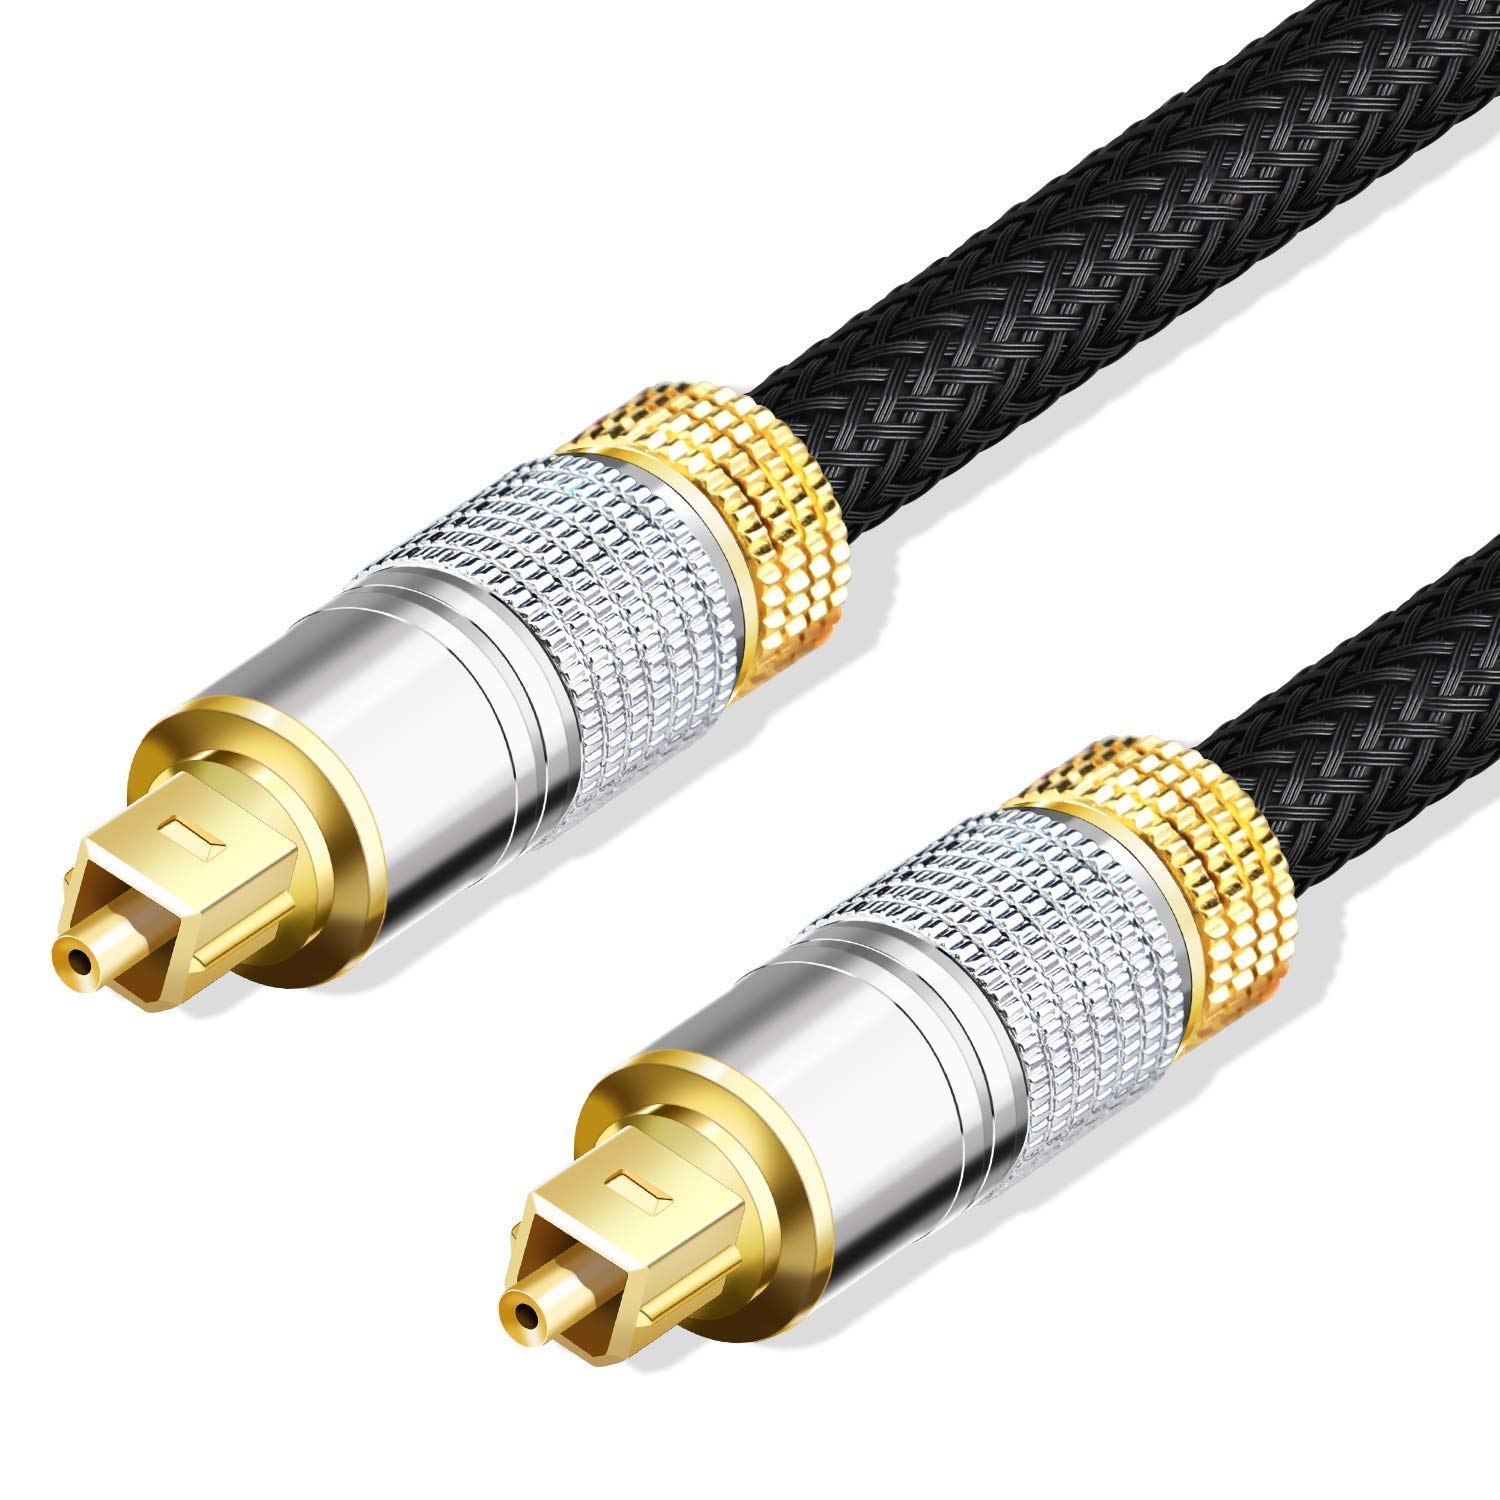 ISTAR 1.8M-5.9FT Digital Fiber Optical Toslink Cable Gold Plated Audio Lead for Home Theater, Sound Bar, TV, PS4,Xbox, Playstation (Nylon Braided)